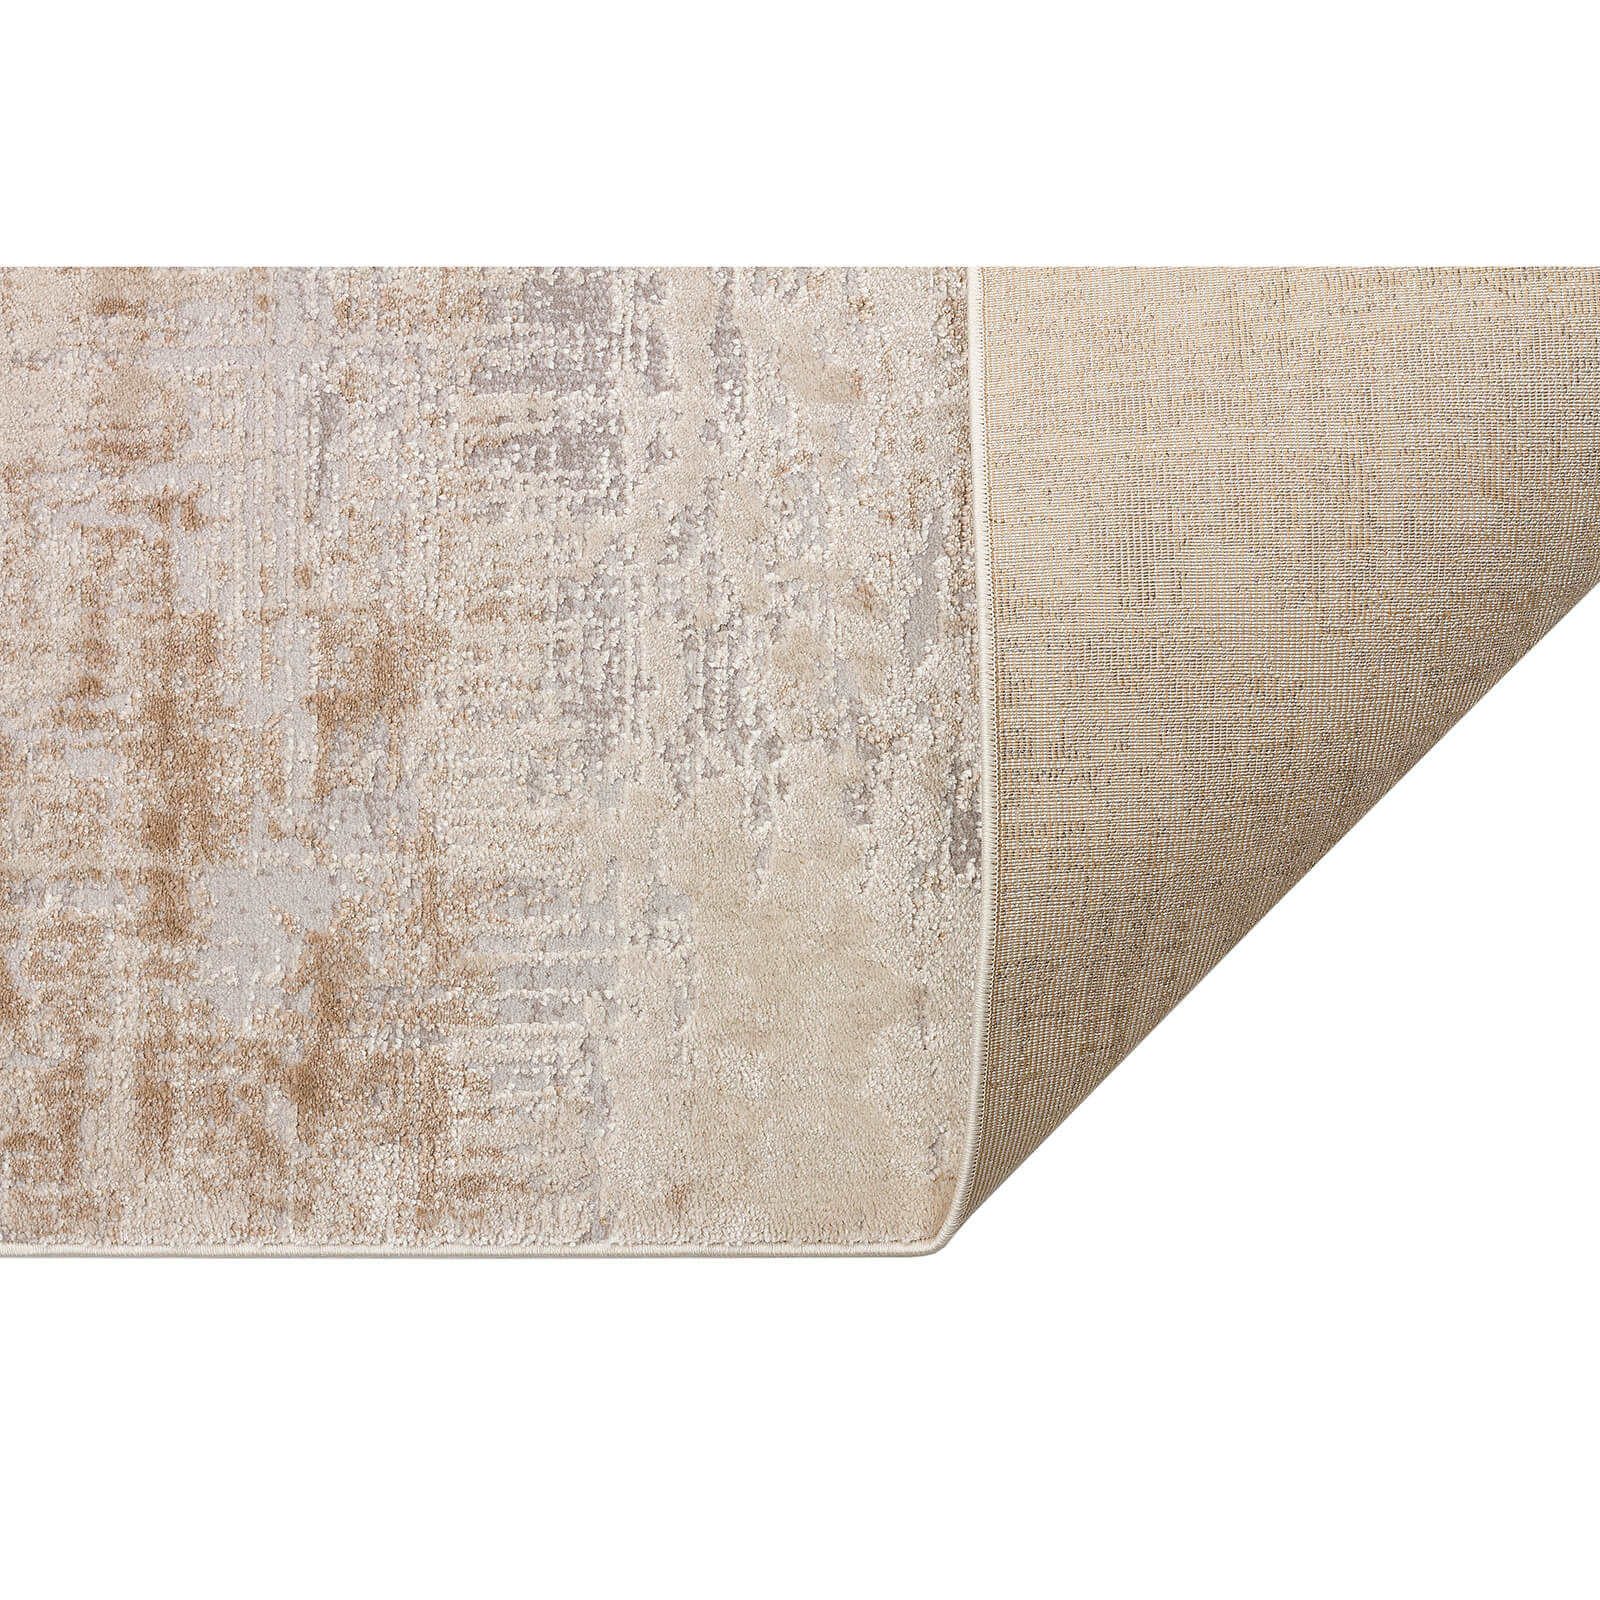 Concept Looms Luzon LUZ809 Ivory Taupe Grey Rug